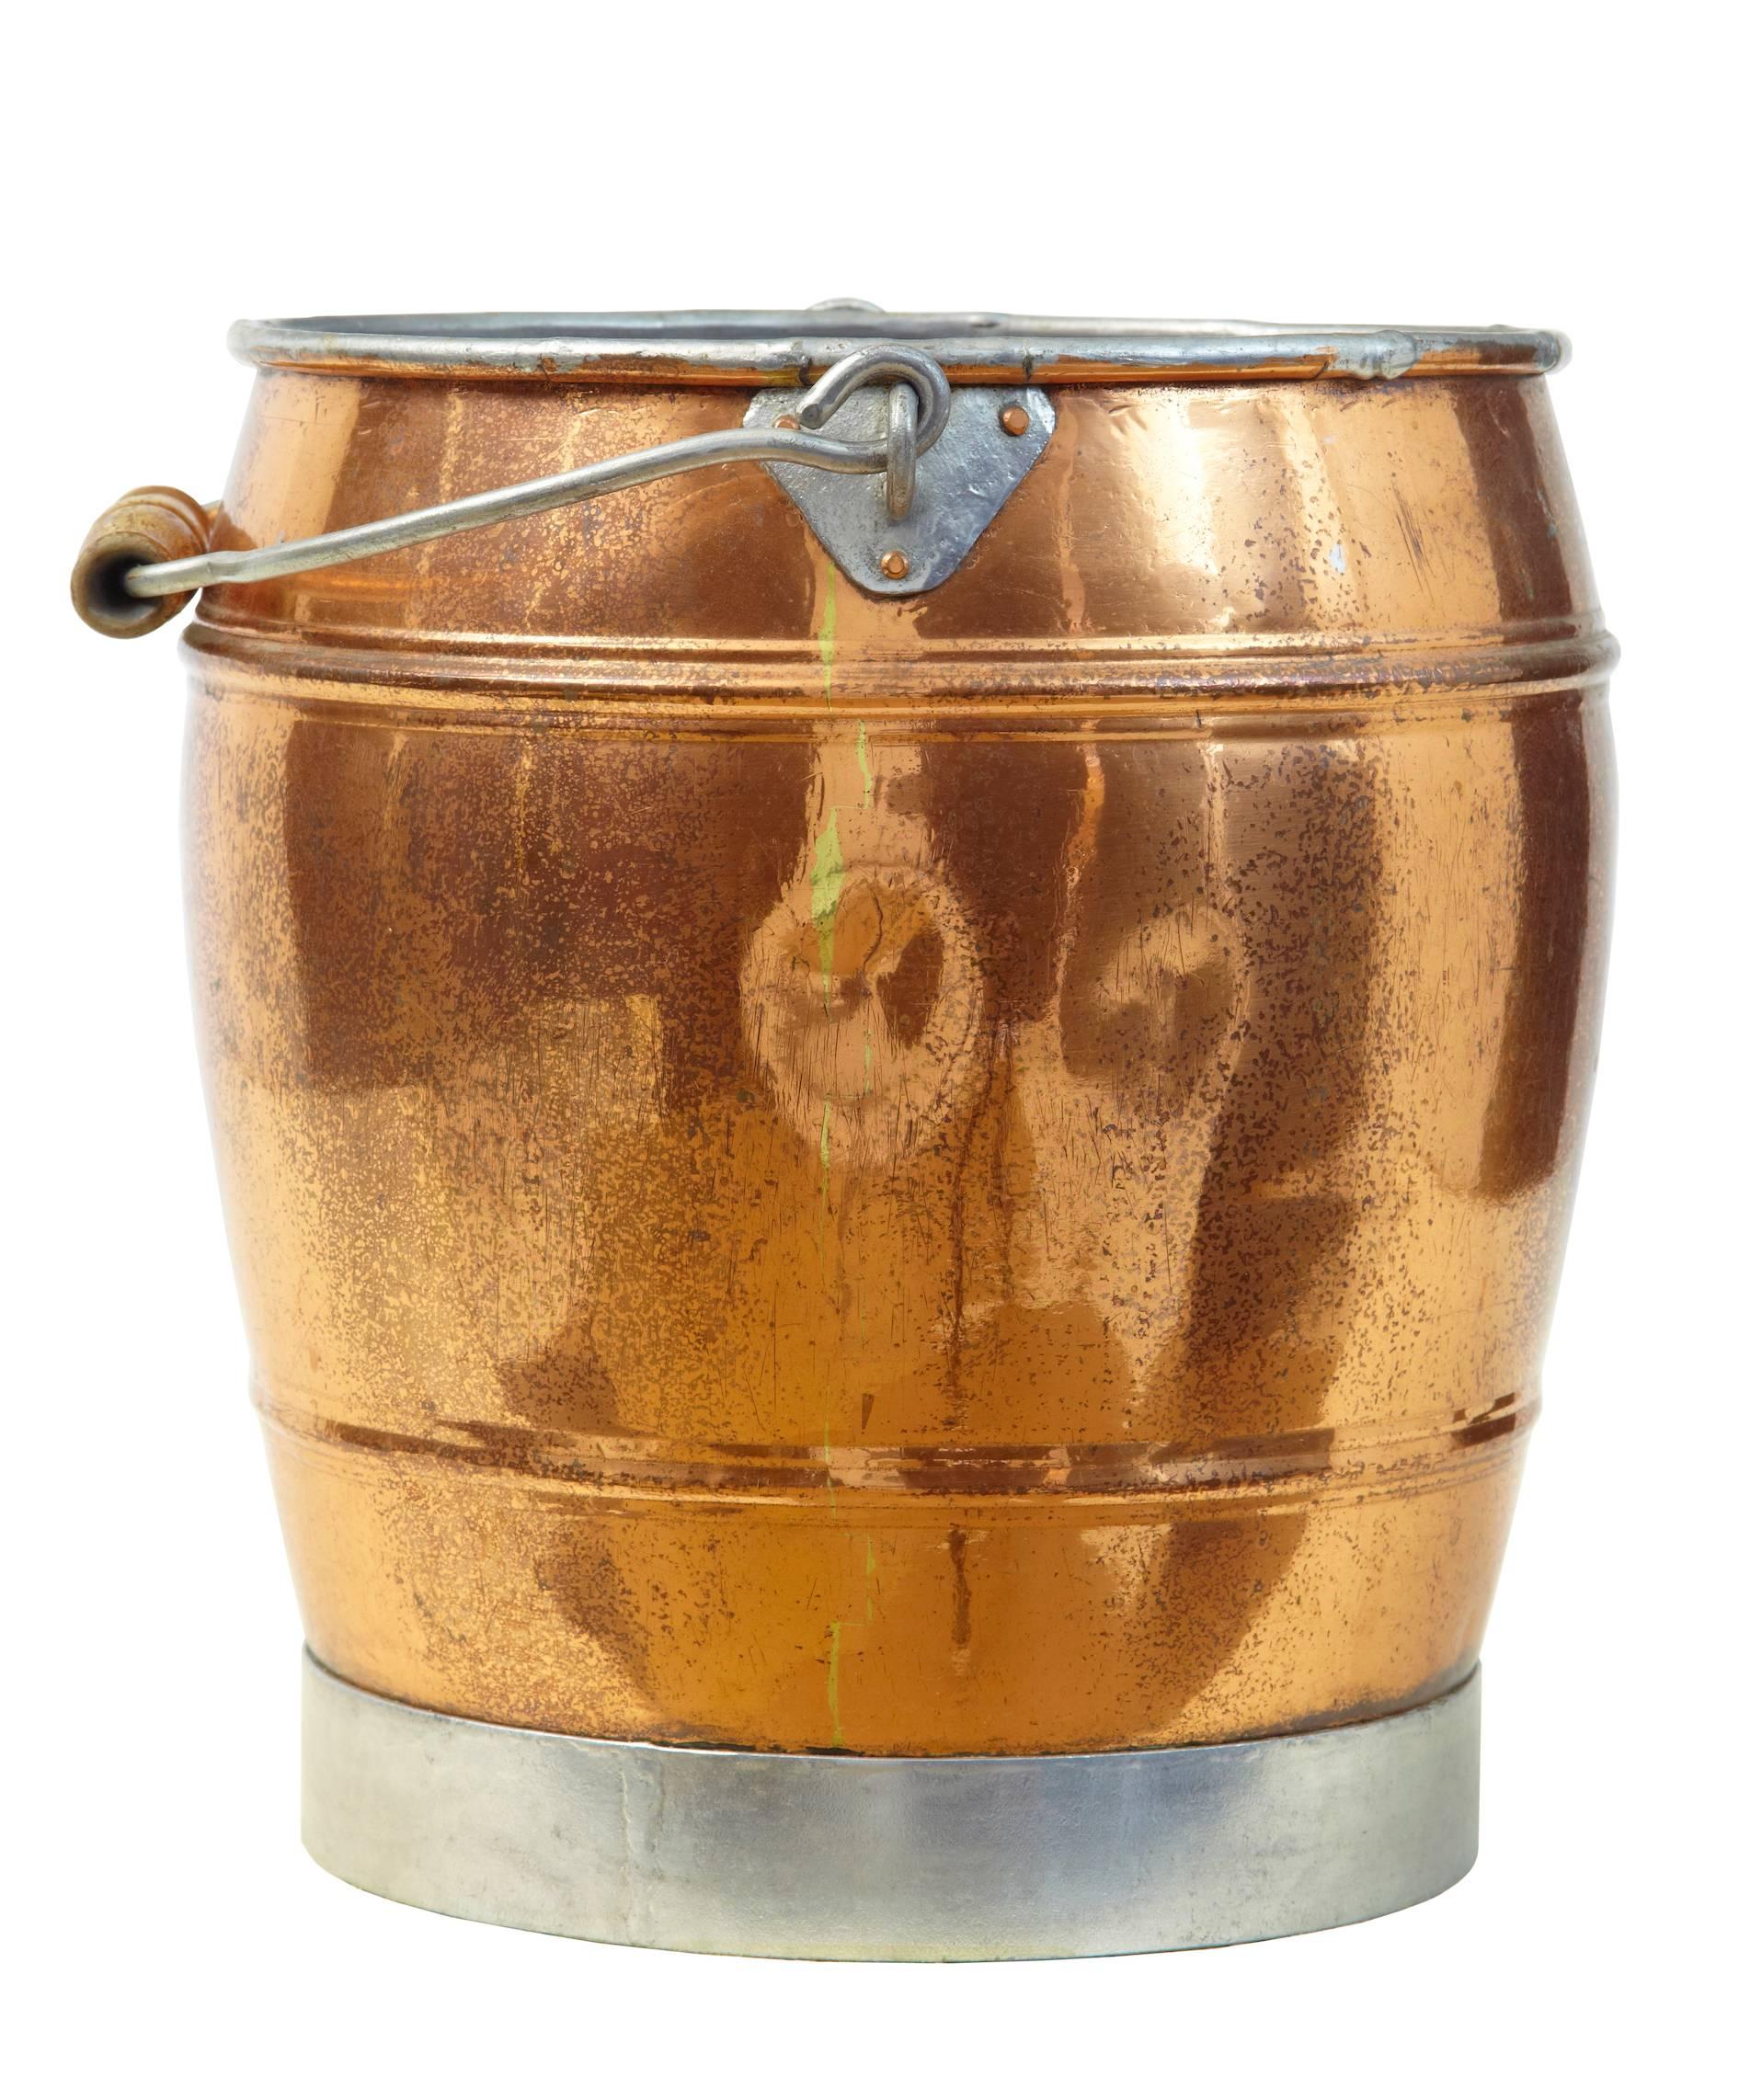 Fine keg shaped bucket, circa 1890. Steel rimmed base with wooden handle.

Measures: Height: 12